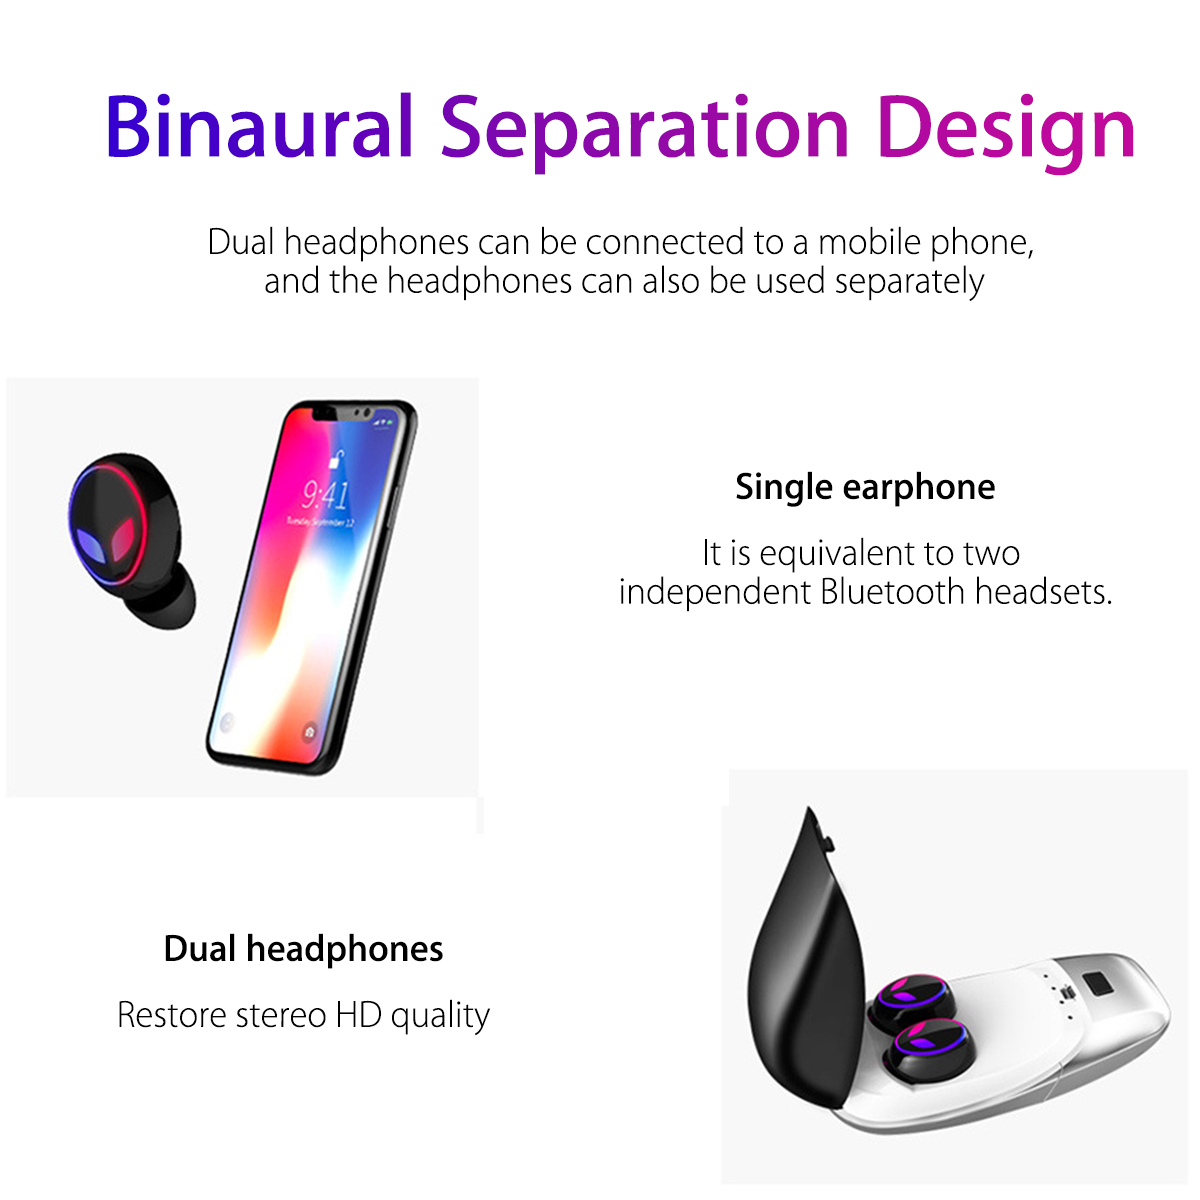 Portable-Wireless-bluetooth-50-Earphone-HiFi-Sound-Smart-Touch-Noise-Cancelling-Bliateral-Call-Headp-1458334-7